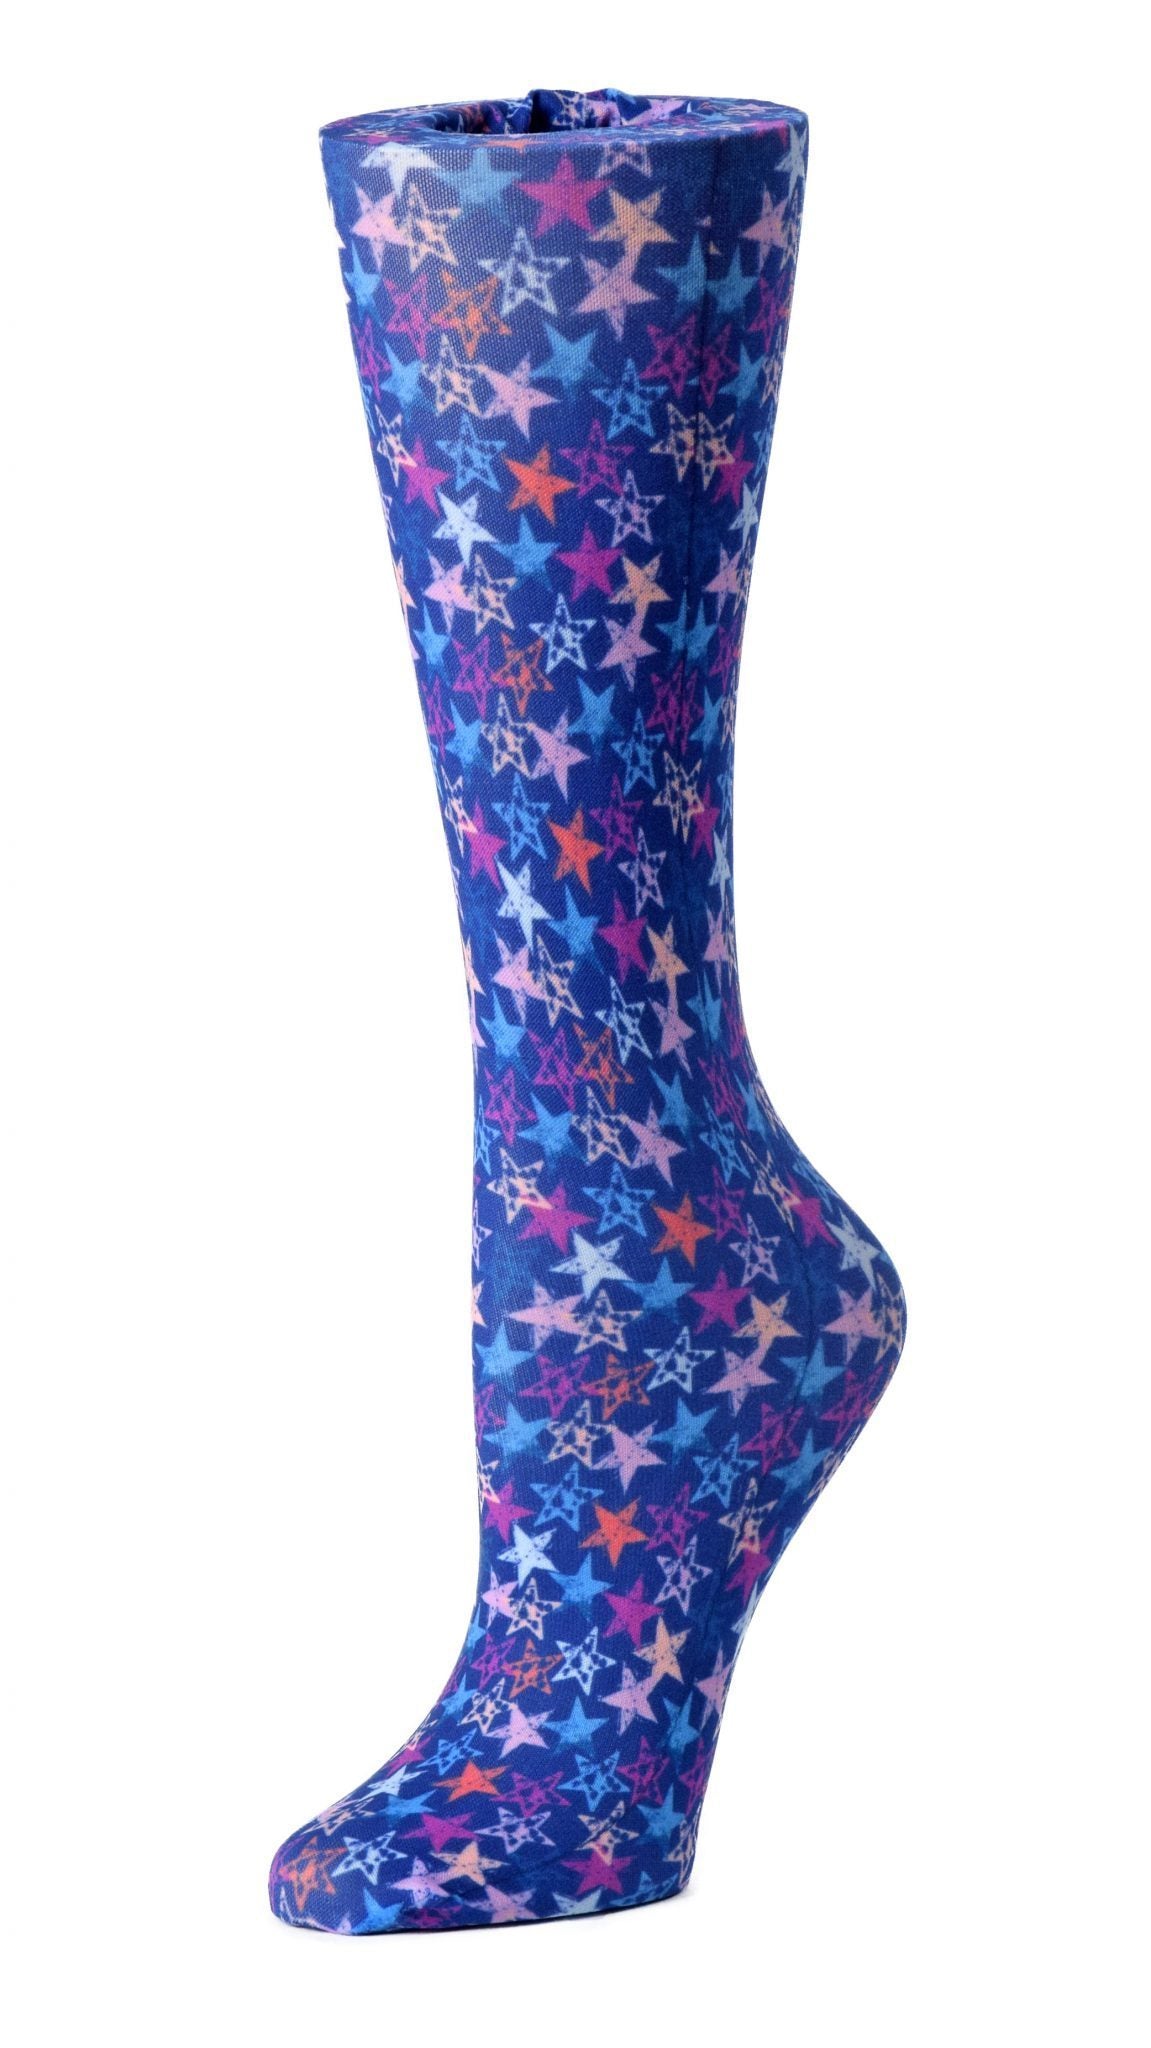 Cutieful Moderate Compression Socks 10-18 mmHg Knit in Print Patterns Abstract Stars at Parker's Clothing and Shoes.